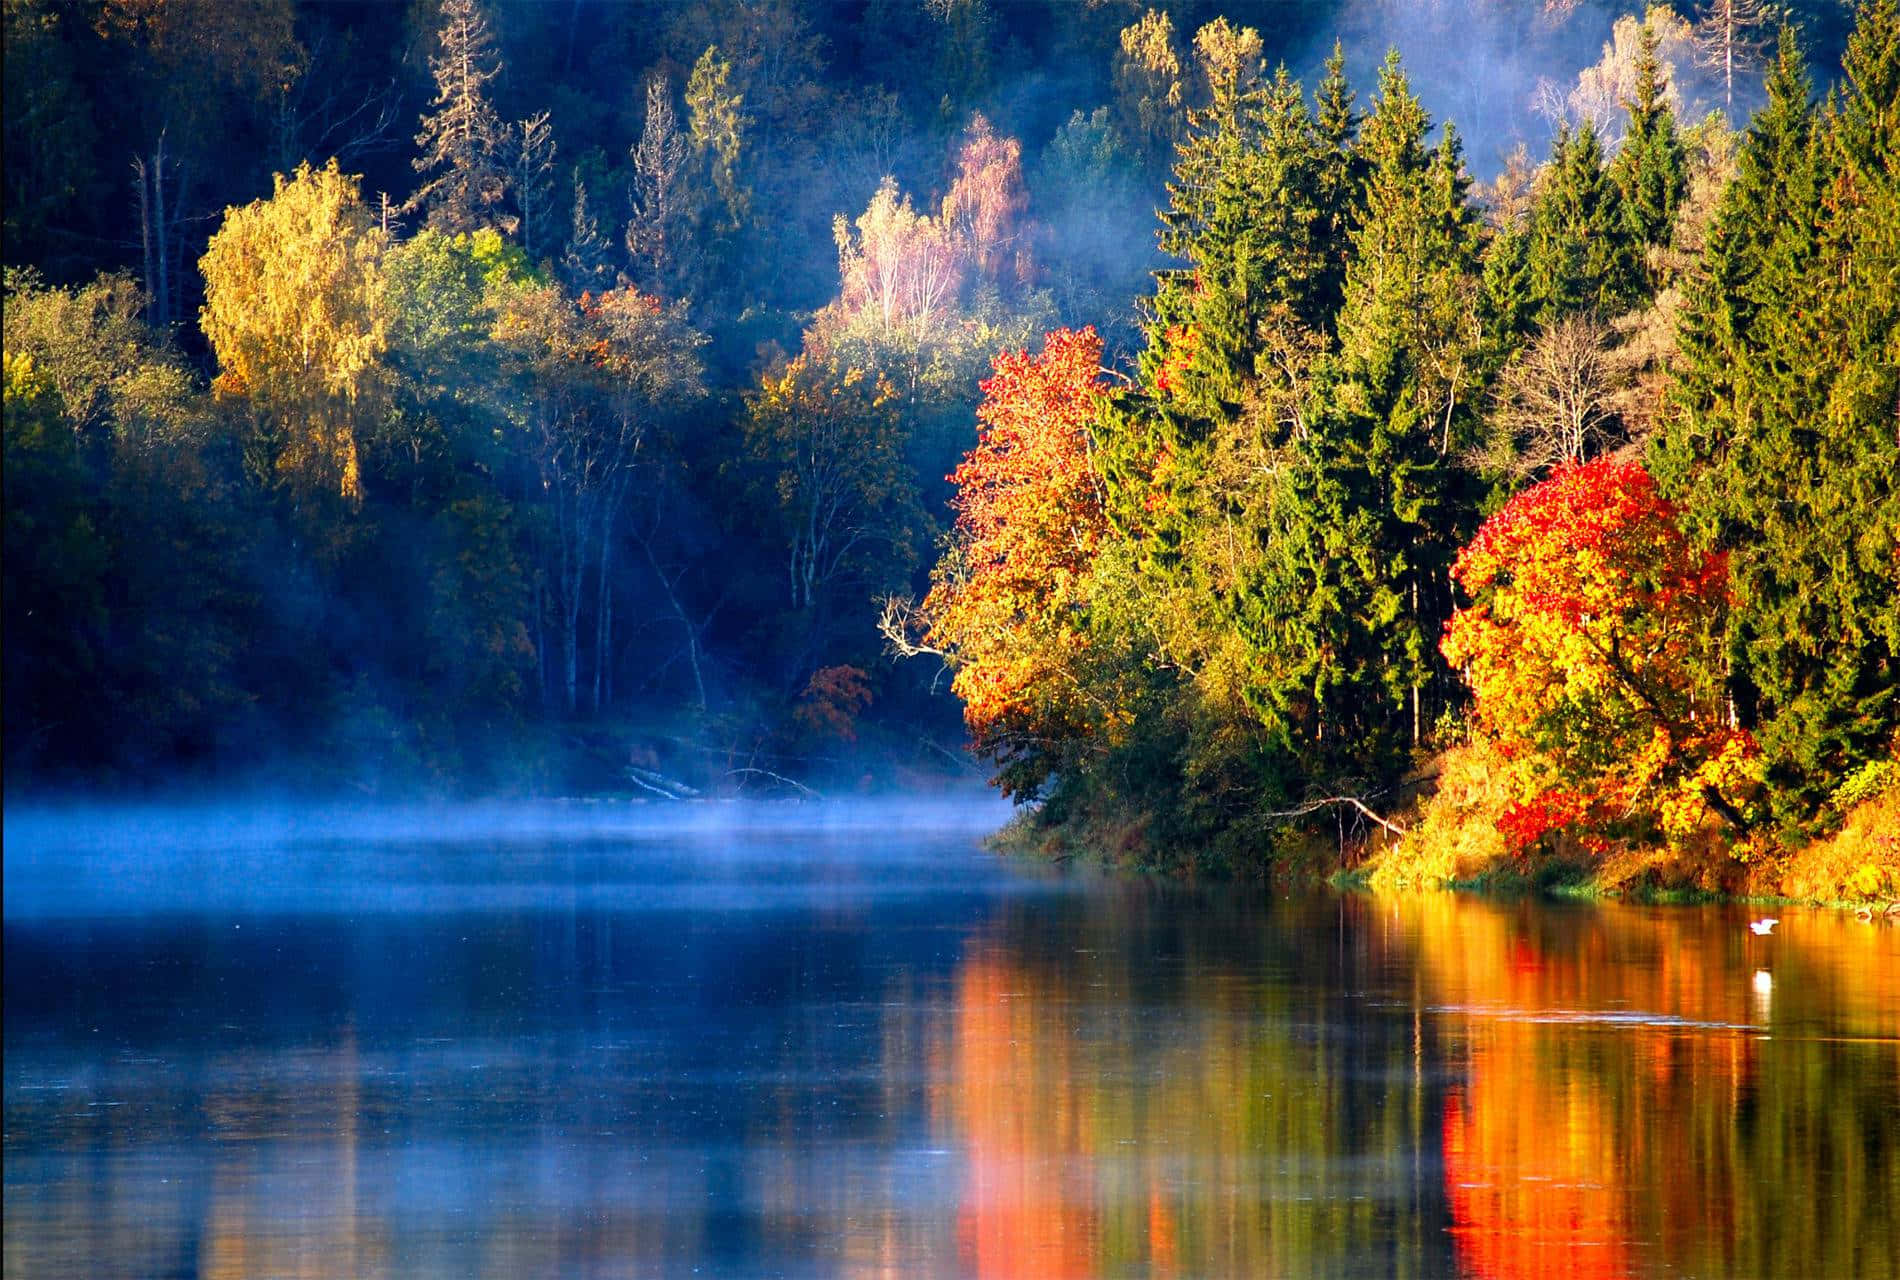 Serene Fall Lake surrounded by colorful foliage Wallpaper